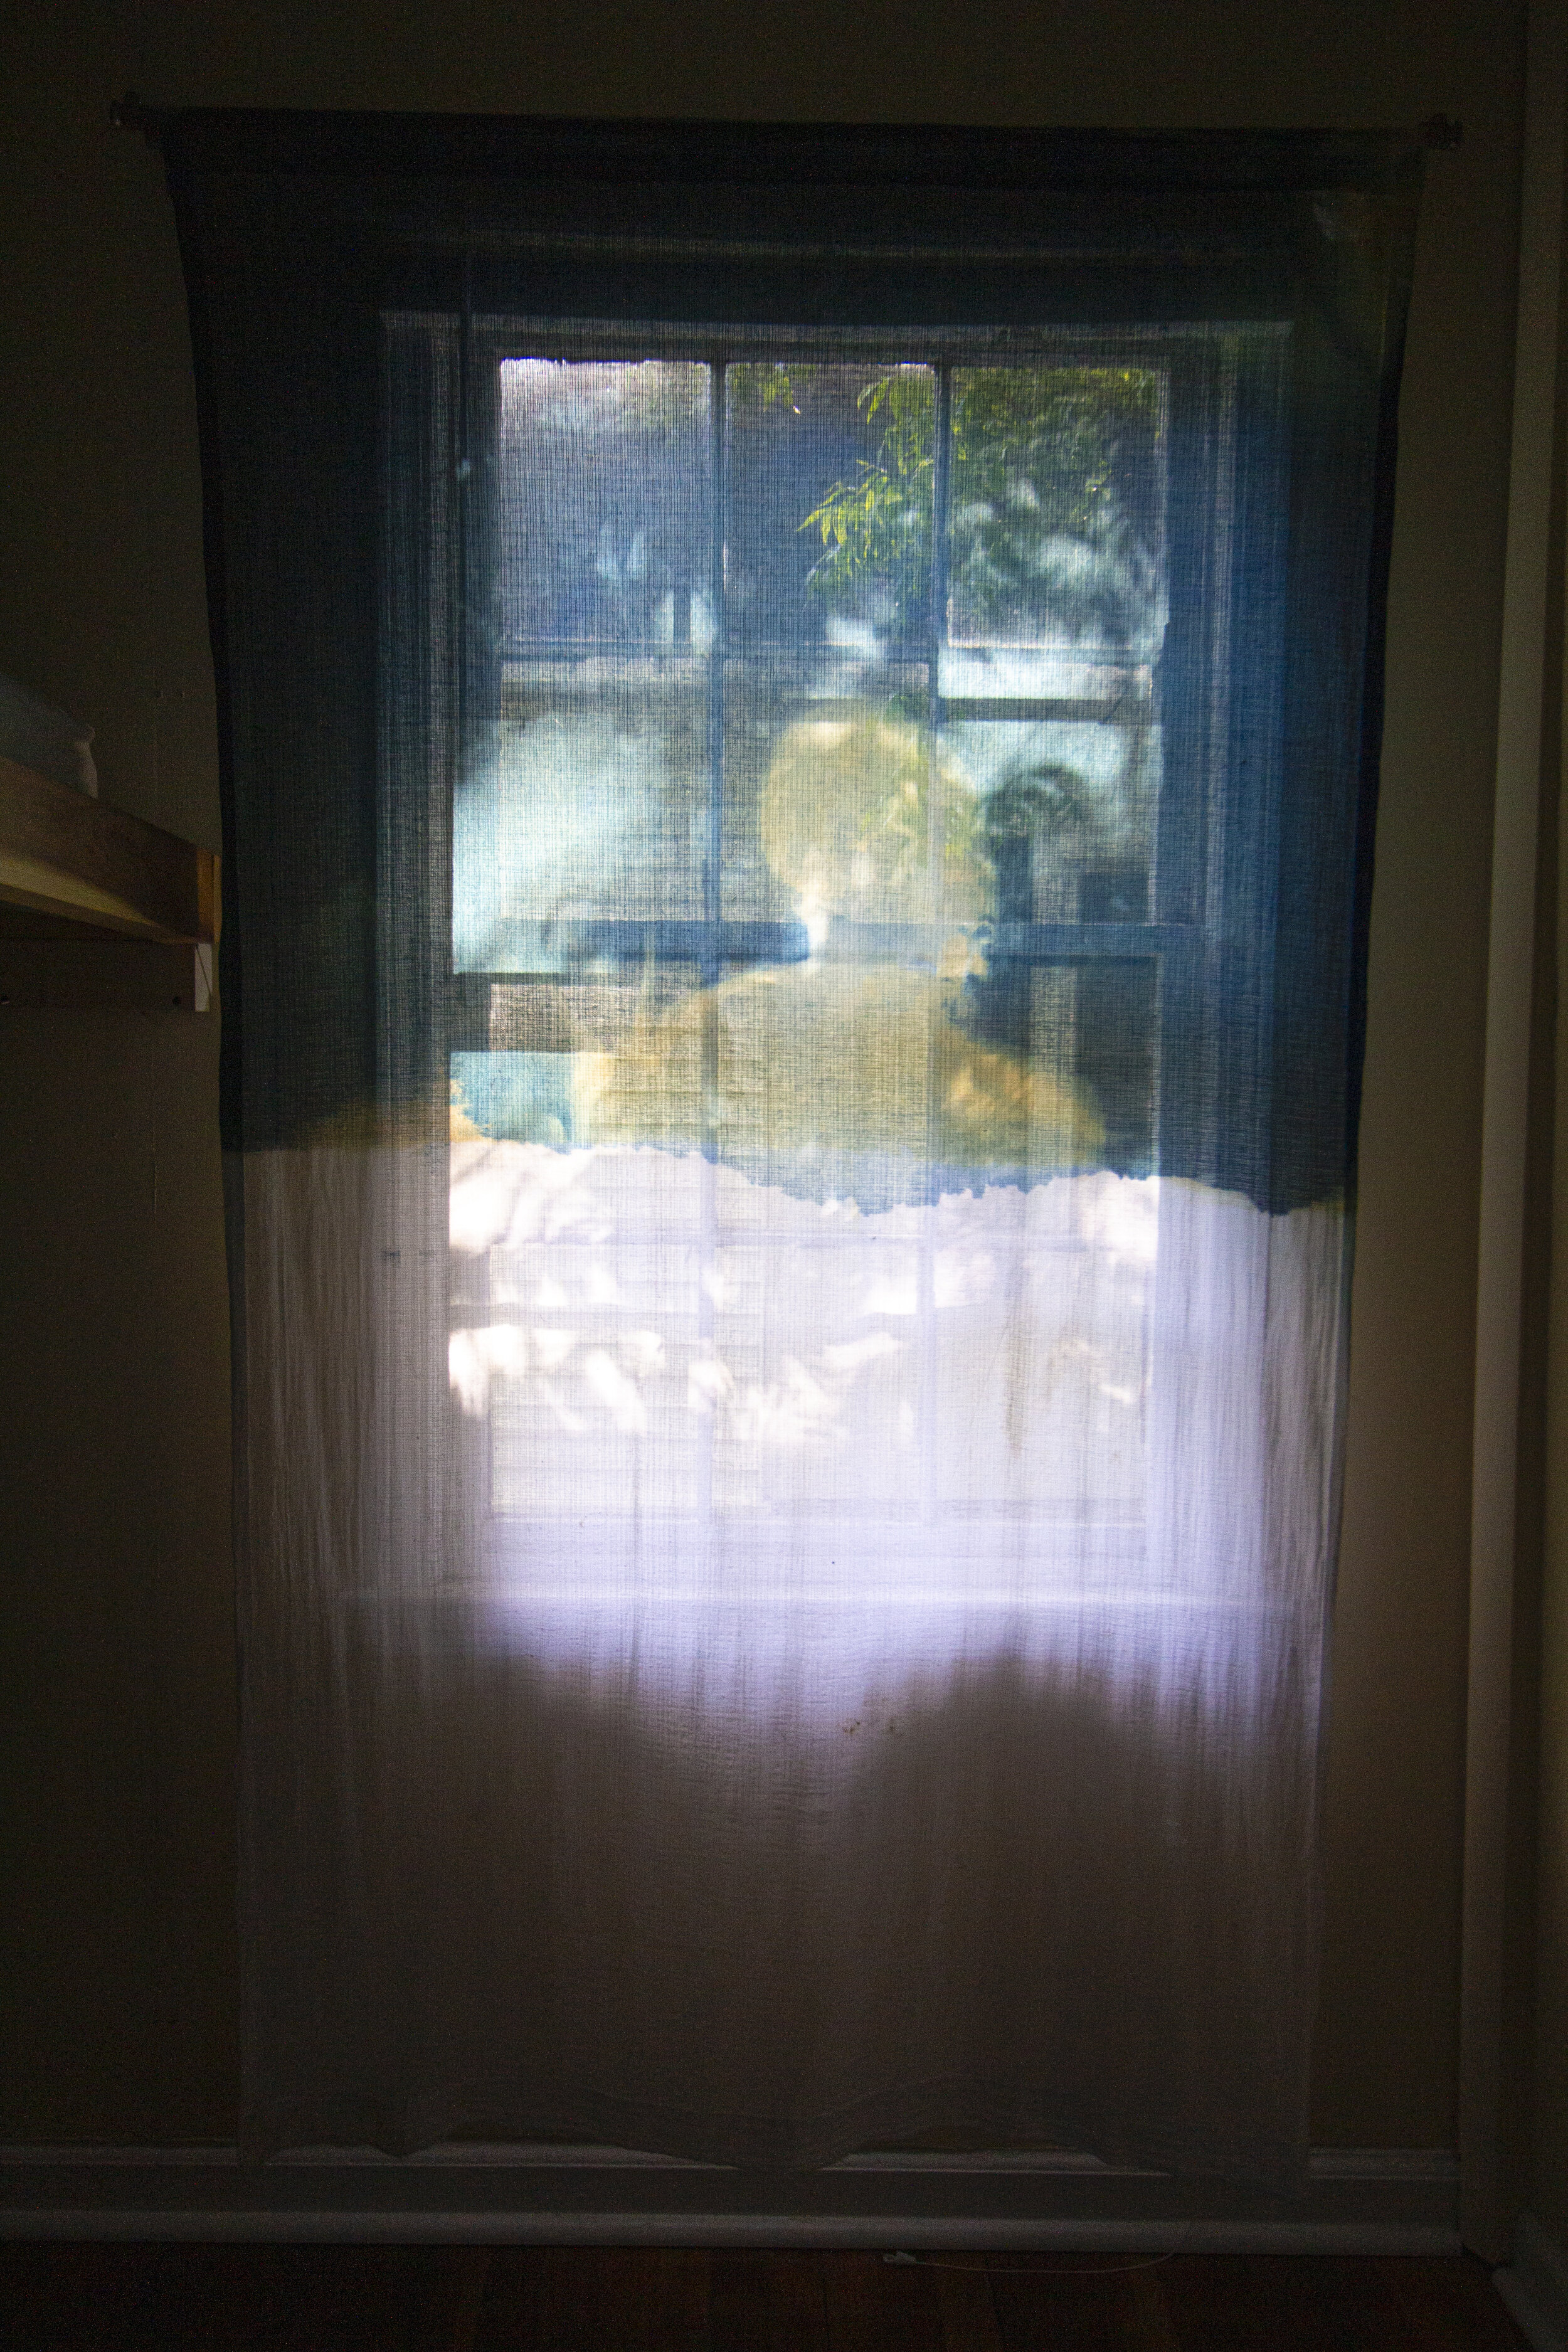 Sunrise [late afternoon], 2020, cotton curtain, cyanotype solution, curtain rod, and hardware, 55 x 84 inches